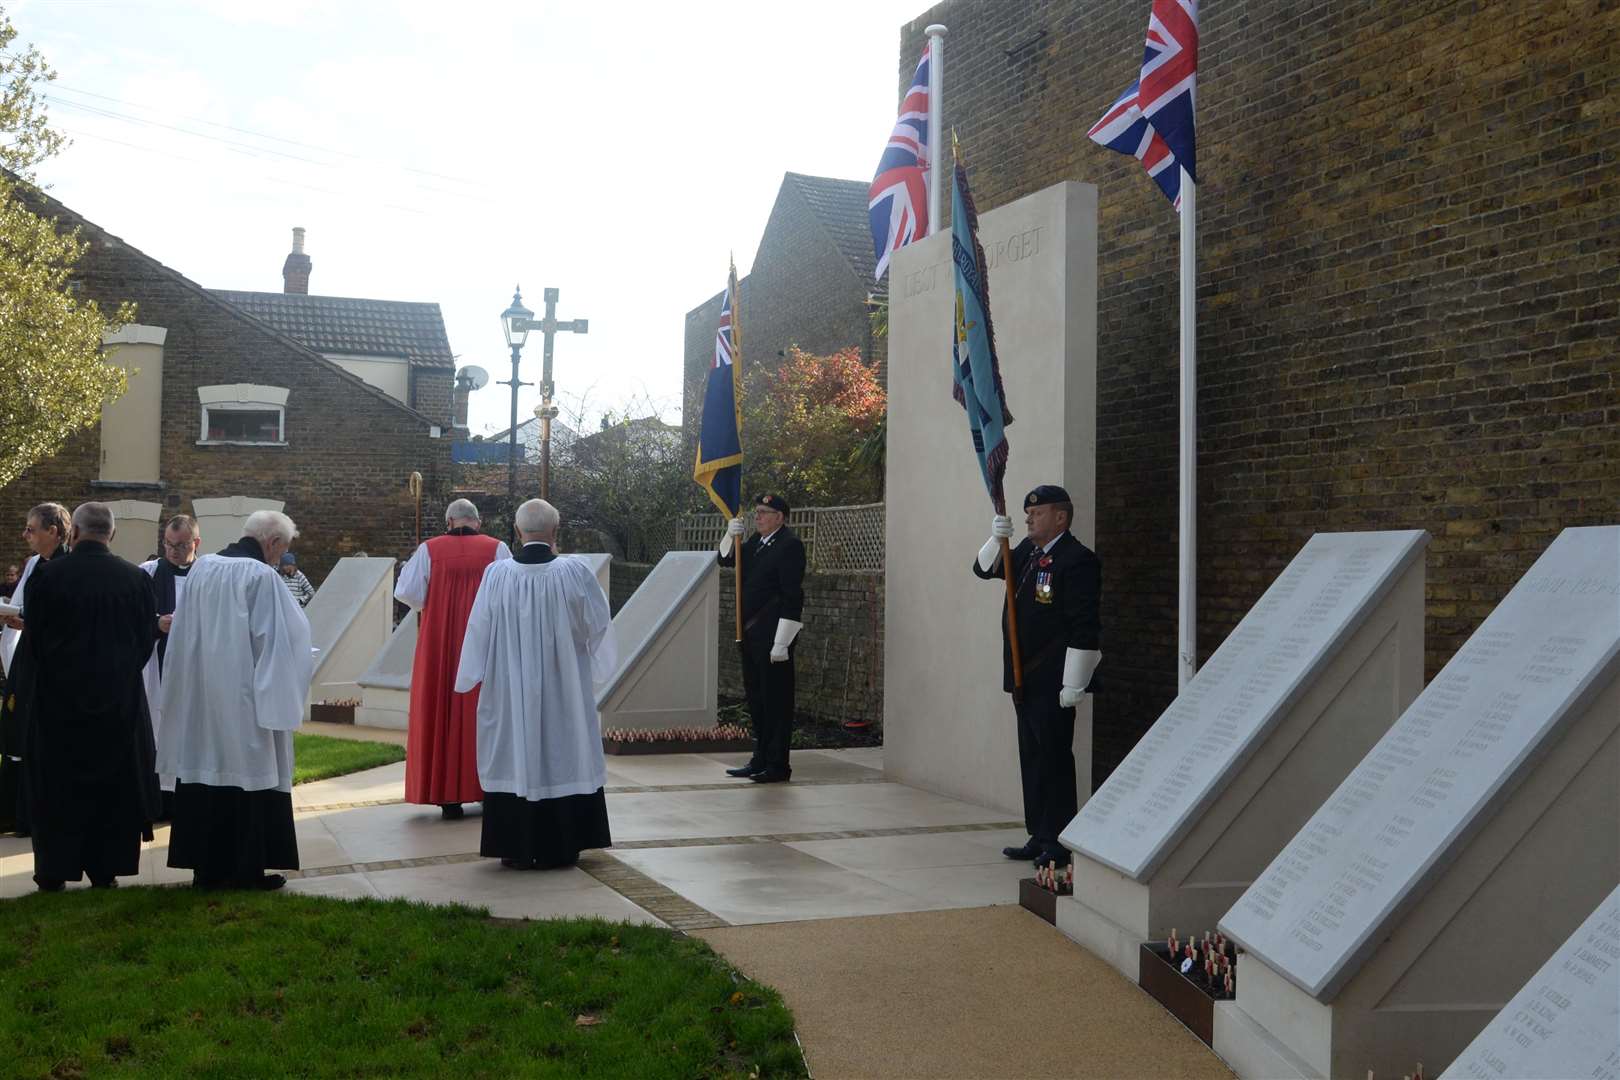 The Faversham memorial garden in Stone Street during a Remembrance Sunday commemoration